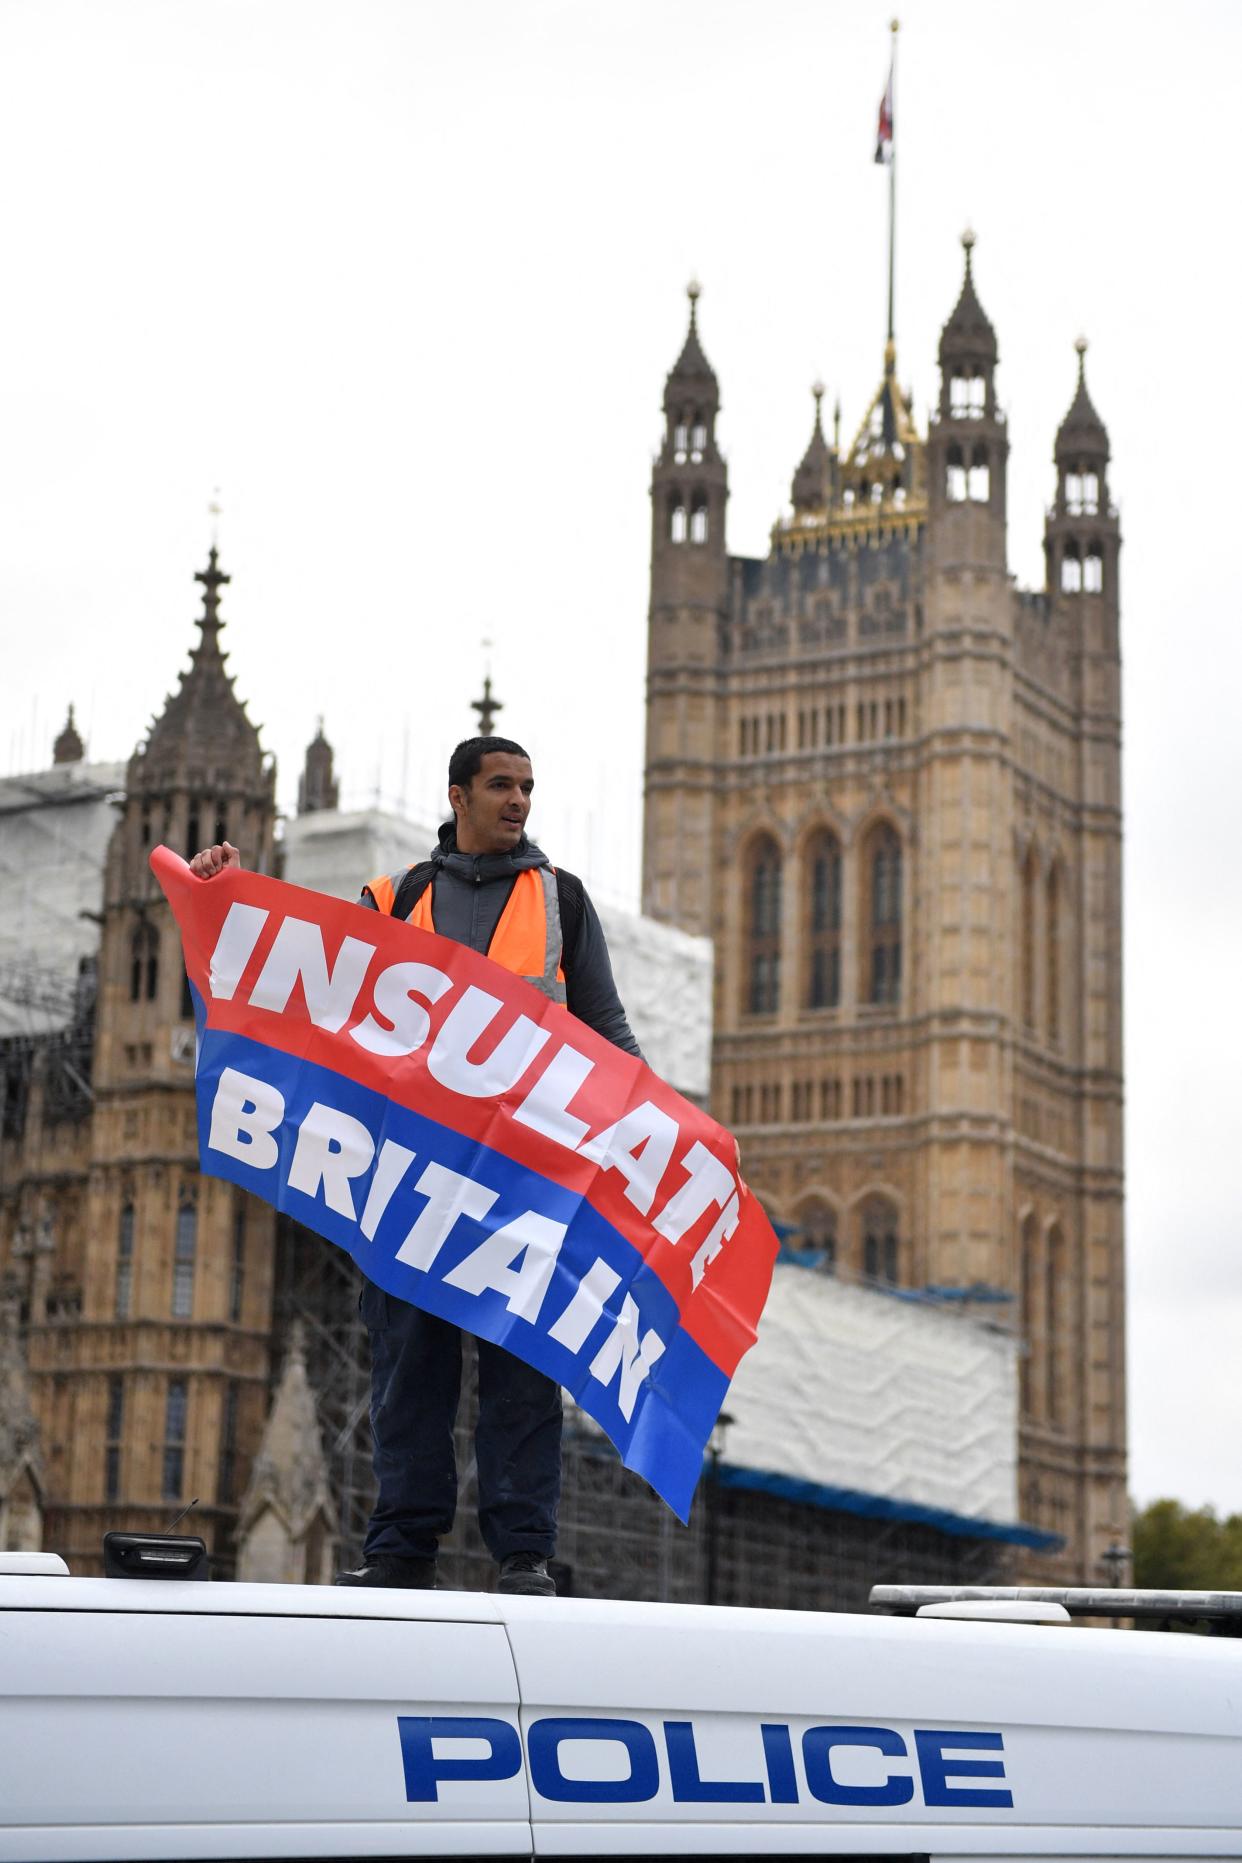 An environmental activist from the group Insulate Britain waves a banner from atop a police van at Parliament Square in central London on November 4, 2021, as protestors call for the UK government to fund the insulation of Britain's homes. - Insulate Britain, a new group whose campaigners have repeatedly blocked roads and motorways in and around the capital, want the government to insulate all British homes starting with social housing. (Photo by JUSTIN TALLIS / AFP) (Photo by JUSTIN TALLIS/AFP via Getty Images)